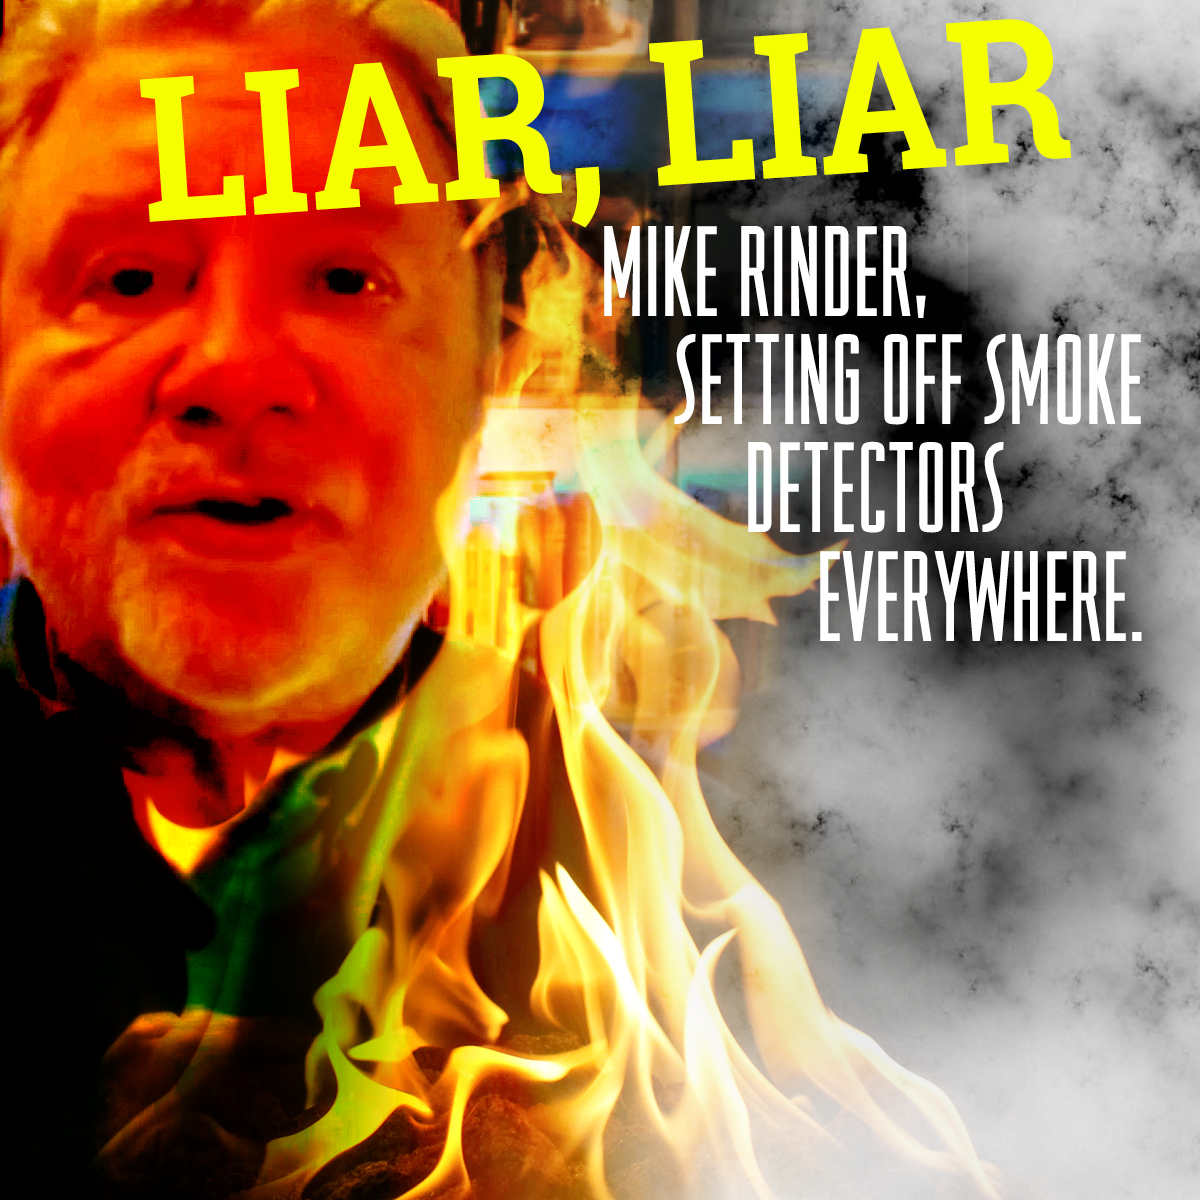 .@MikeRinder should be grateful that the expression “liar, liar pants on fire,” isn’t literal.

He’d be setting off smoke detectors everywhere he goes.